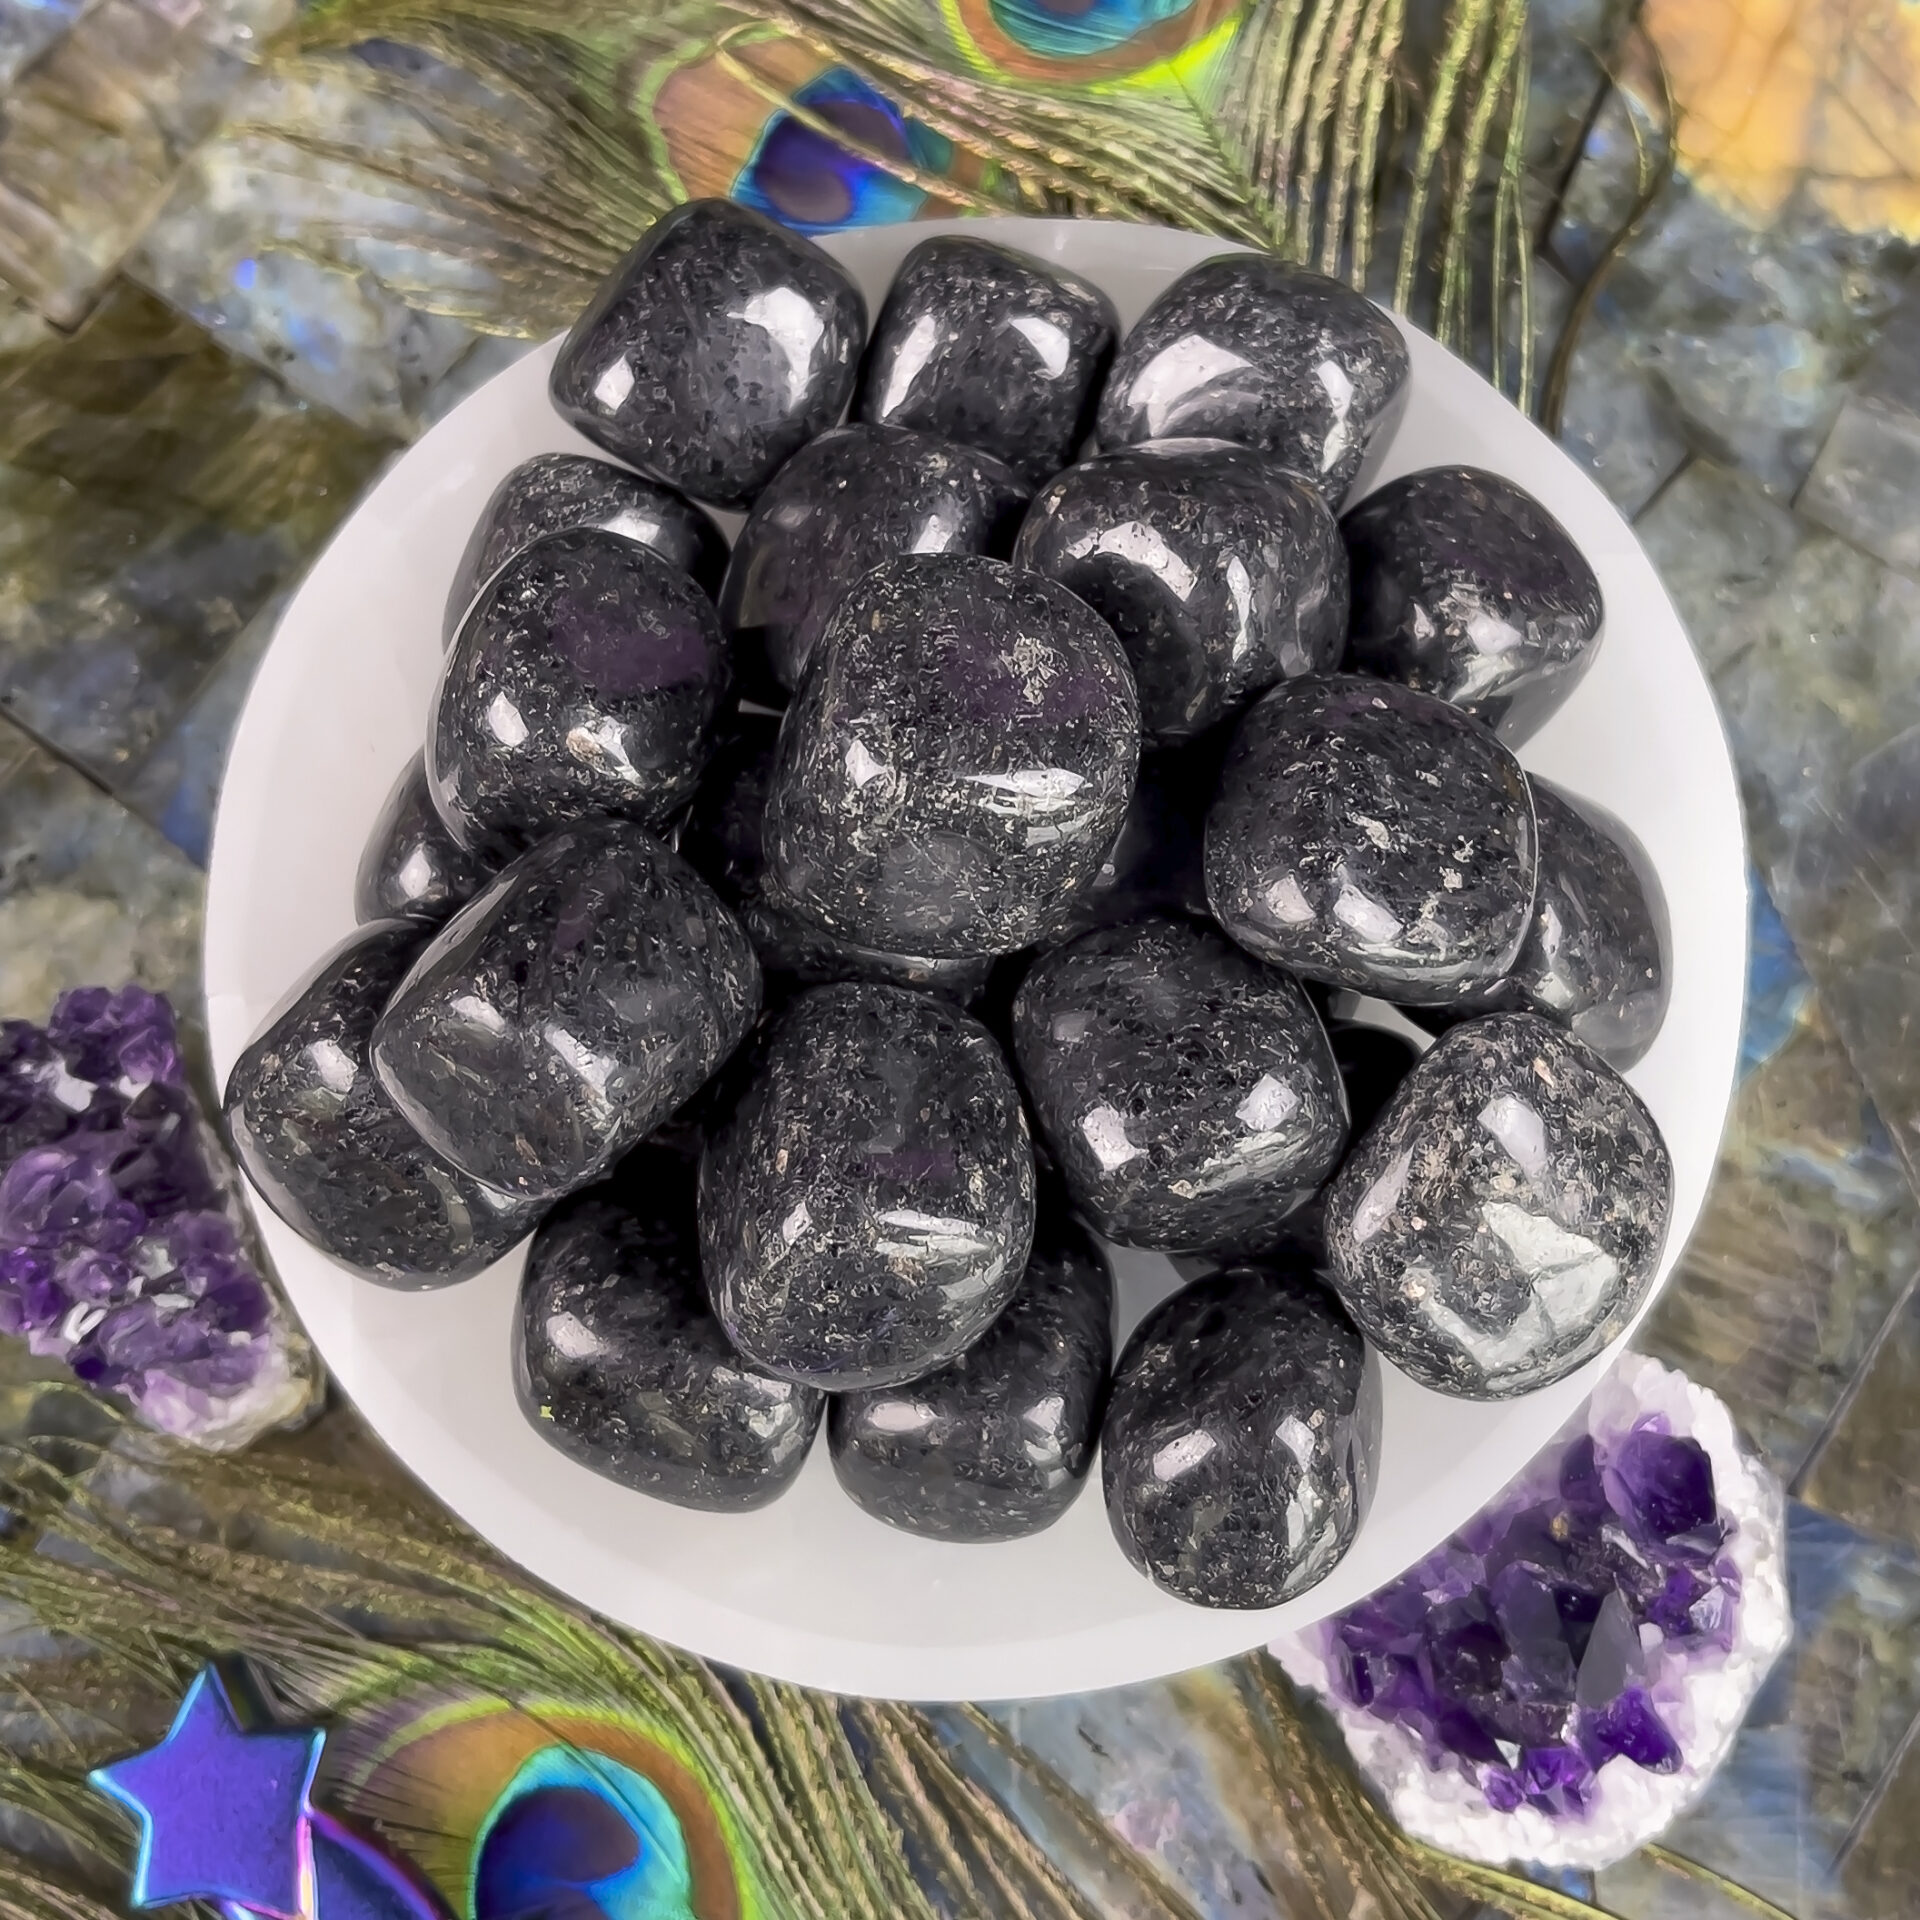 1pc Nuummite AA-Grade Medium/Large Tumbled & Hand Polished Very Protective Natural Healing Crystal Gemstone Specimen from Greenland